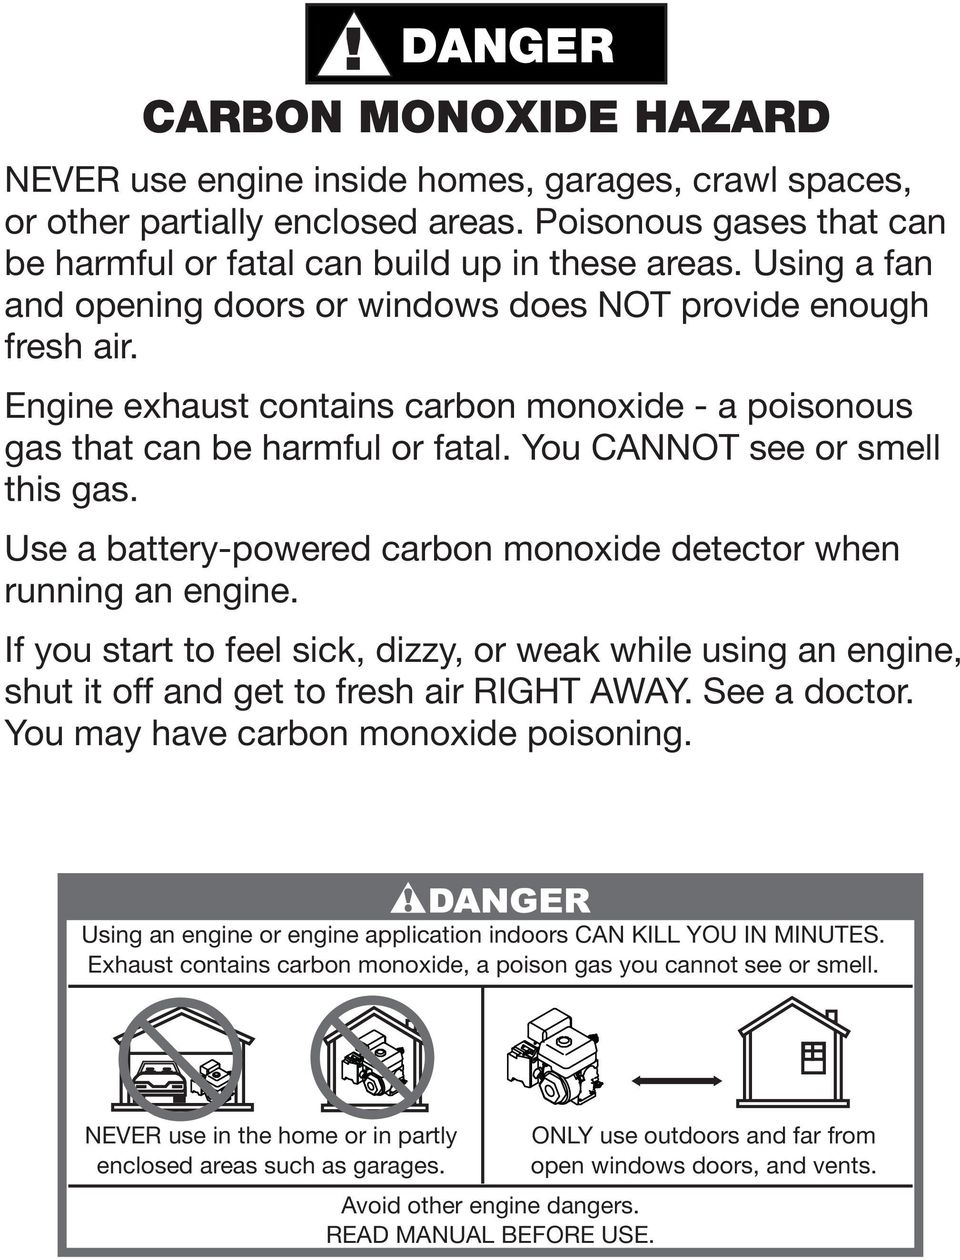 Use a battery-powered carbon monoxide detector when running an engine. If you start to feel sick, dizzy, or weak while using an engine, shut it off and get to fresh air RIGHT AWAY. See a doctor.